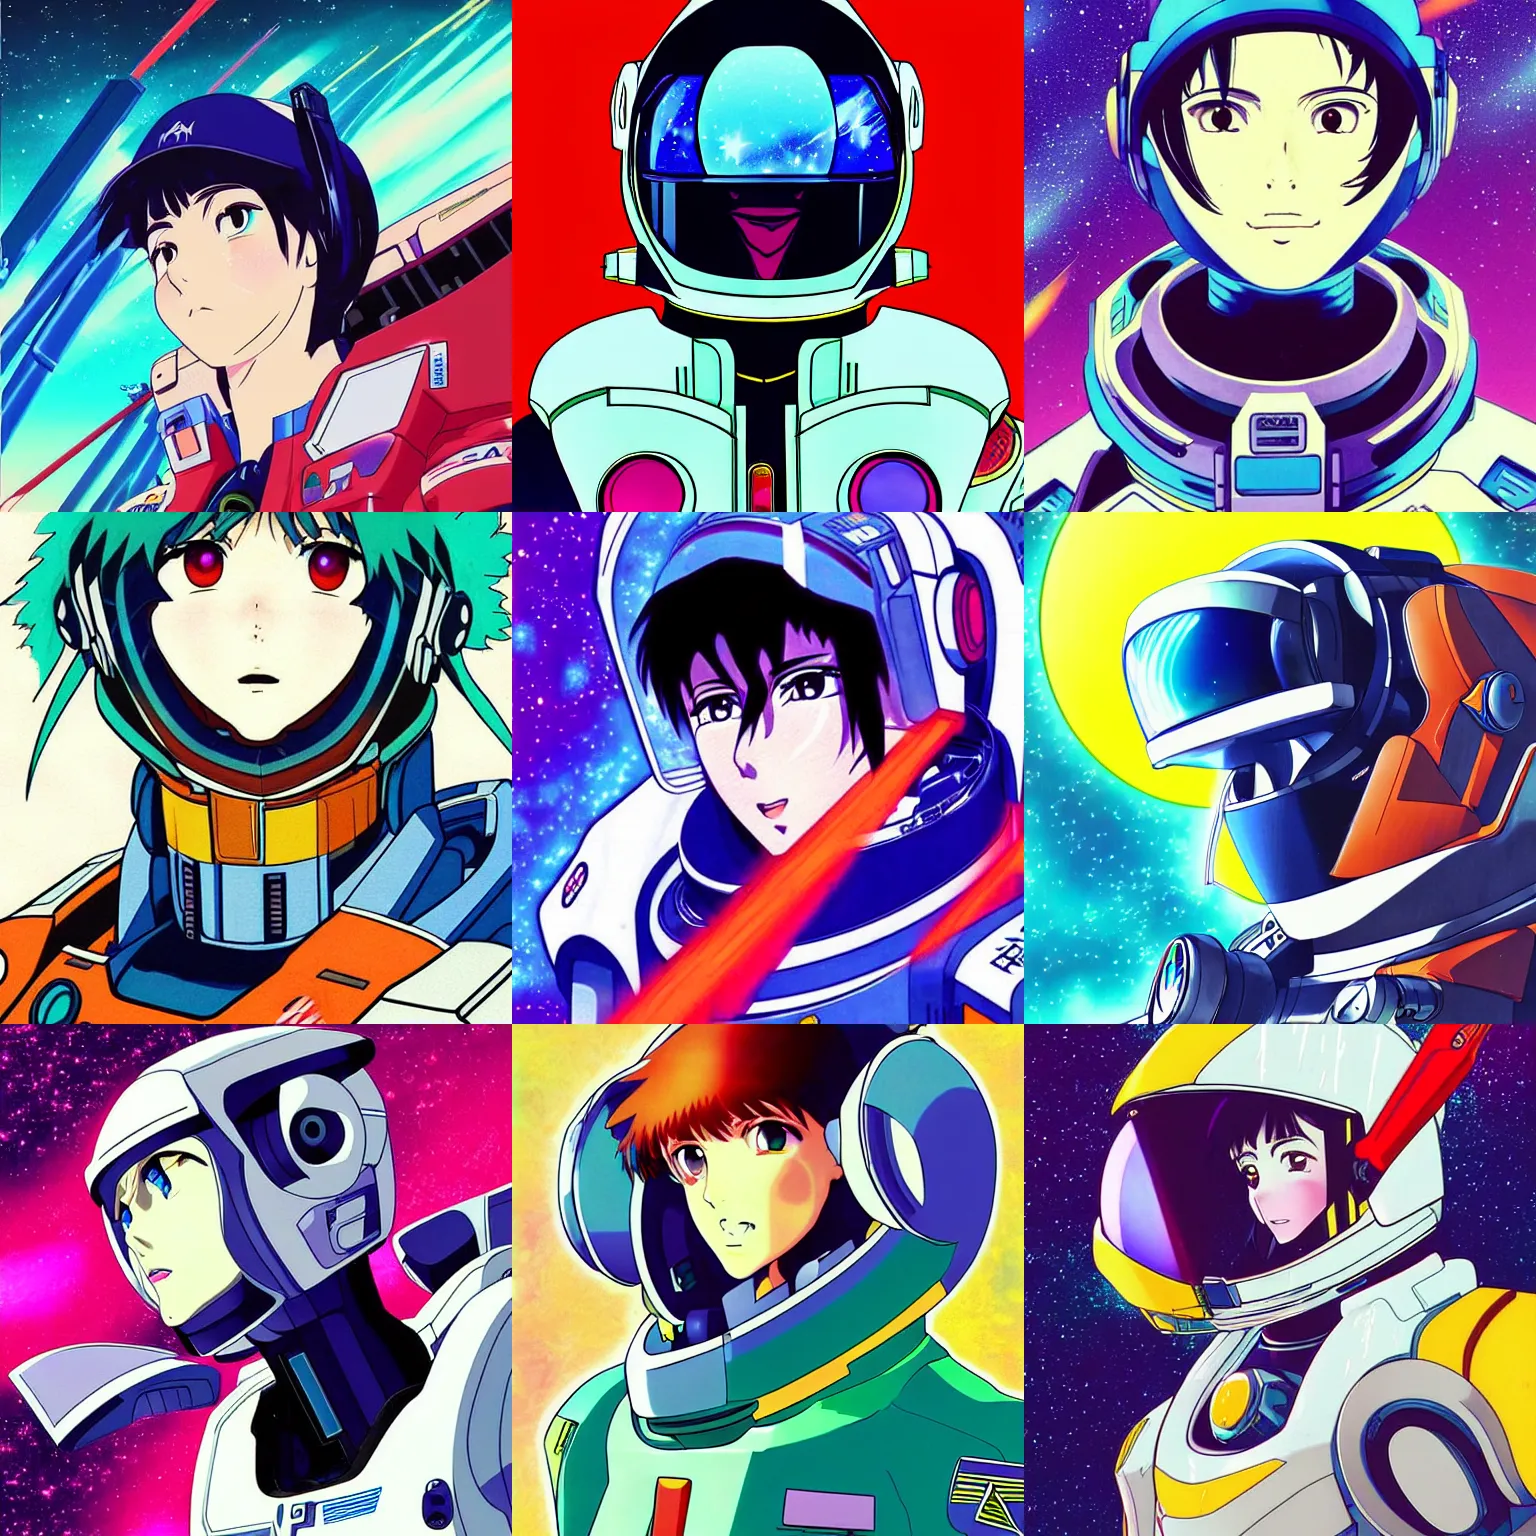 Prompt: “Anime visual portrait of a determined space pilot, from Robotech macross anime series, trending on pixiv, vaporwave”